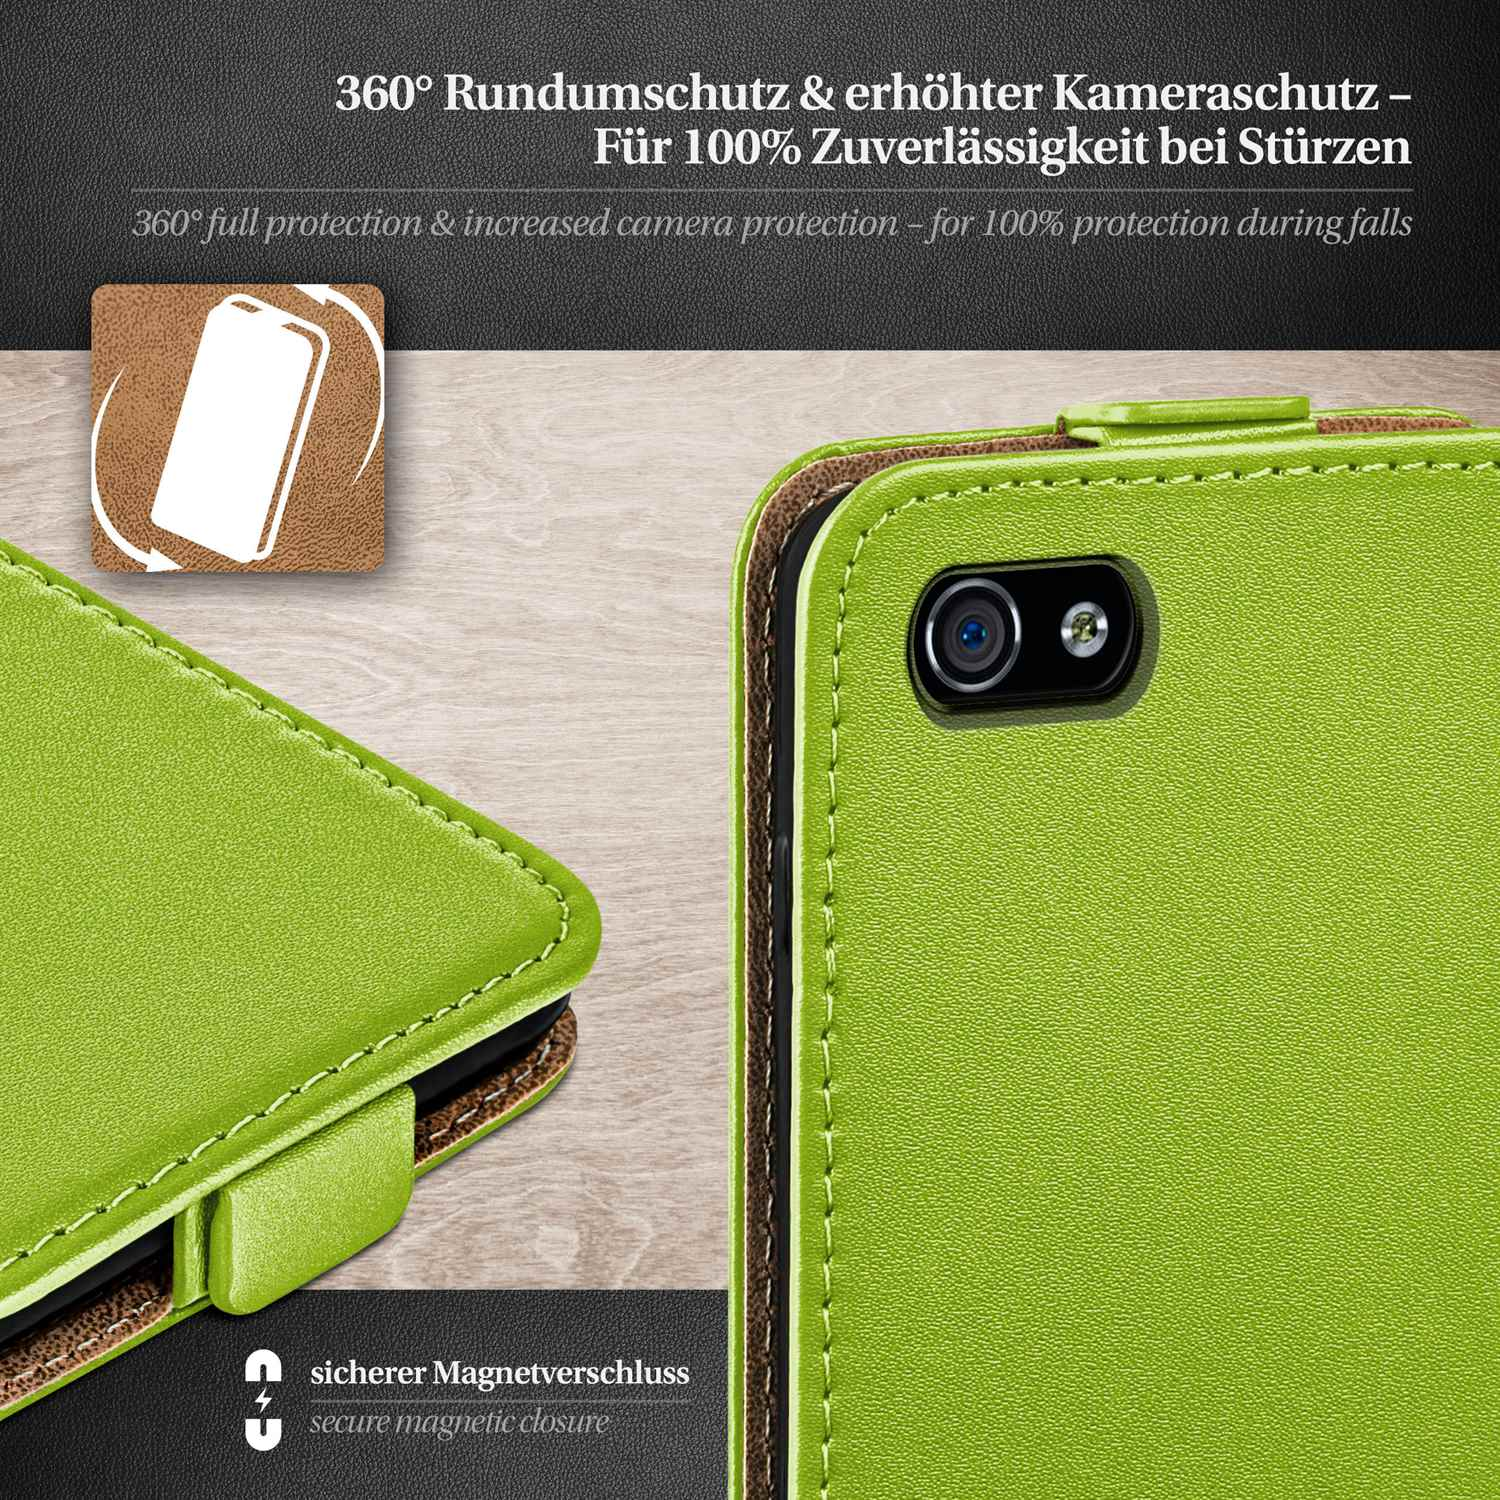 MOEX Flip 4S, Flip Lime-Green Cover, iPhone Case, Apple